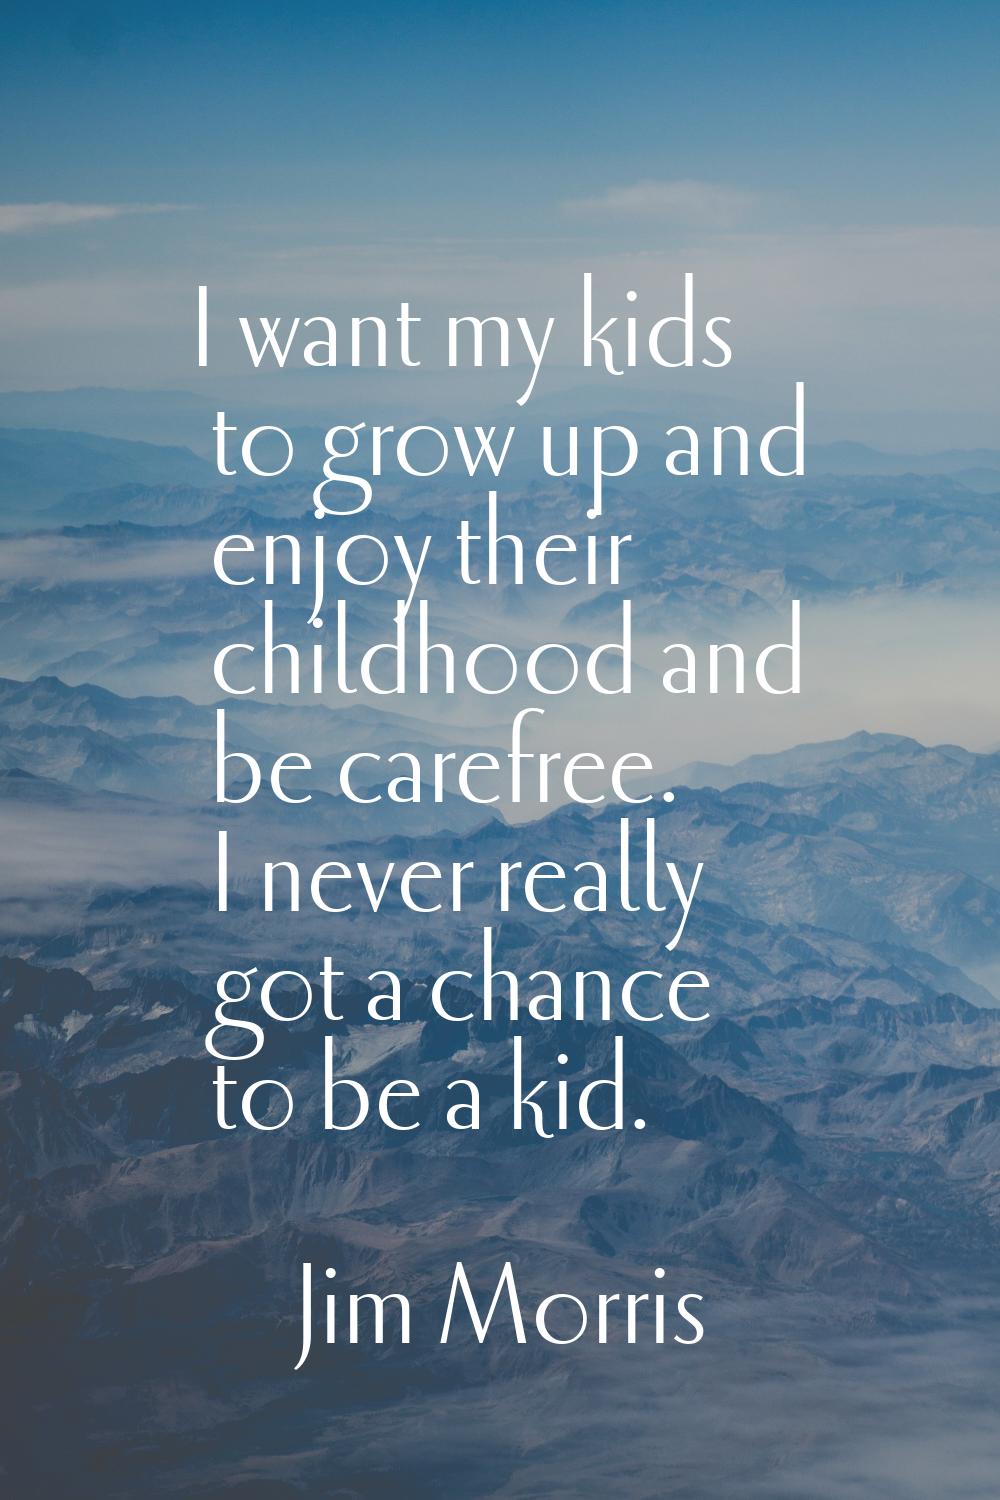 I want my kids to grow up and enjoy their childhood and be carefree. I never really got a chance to